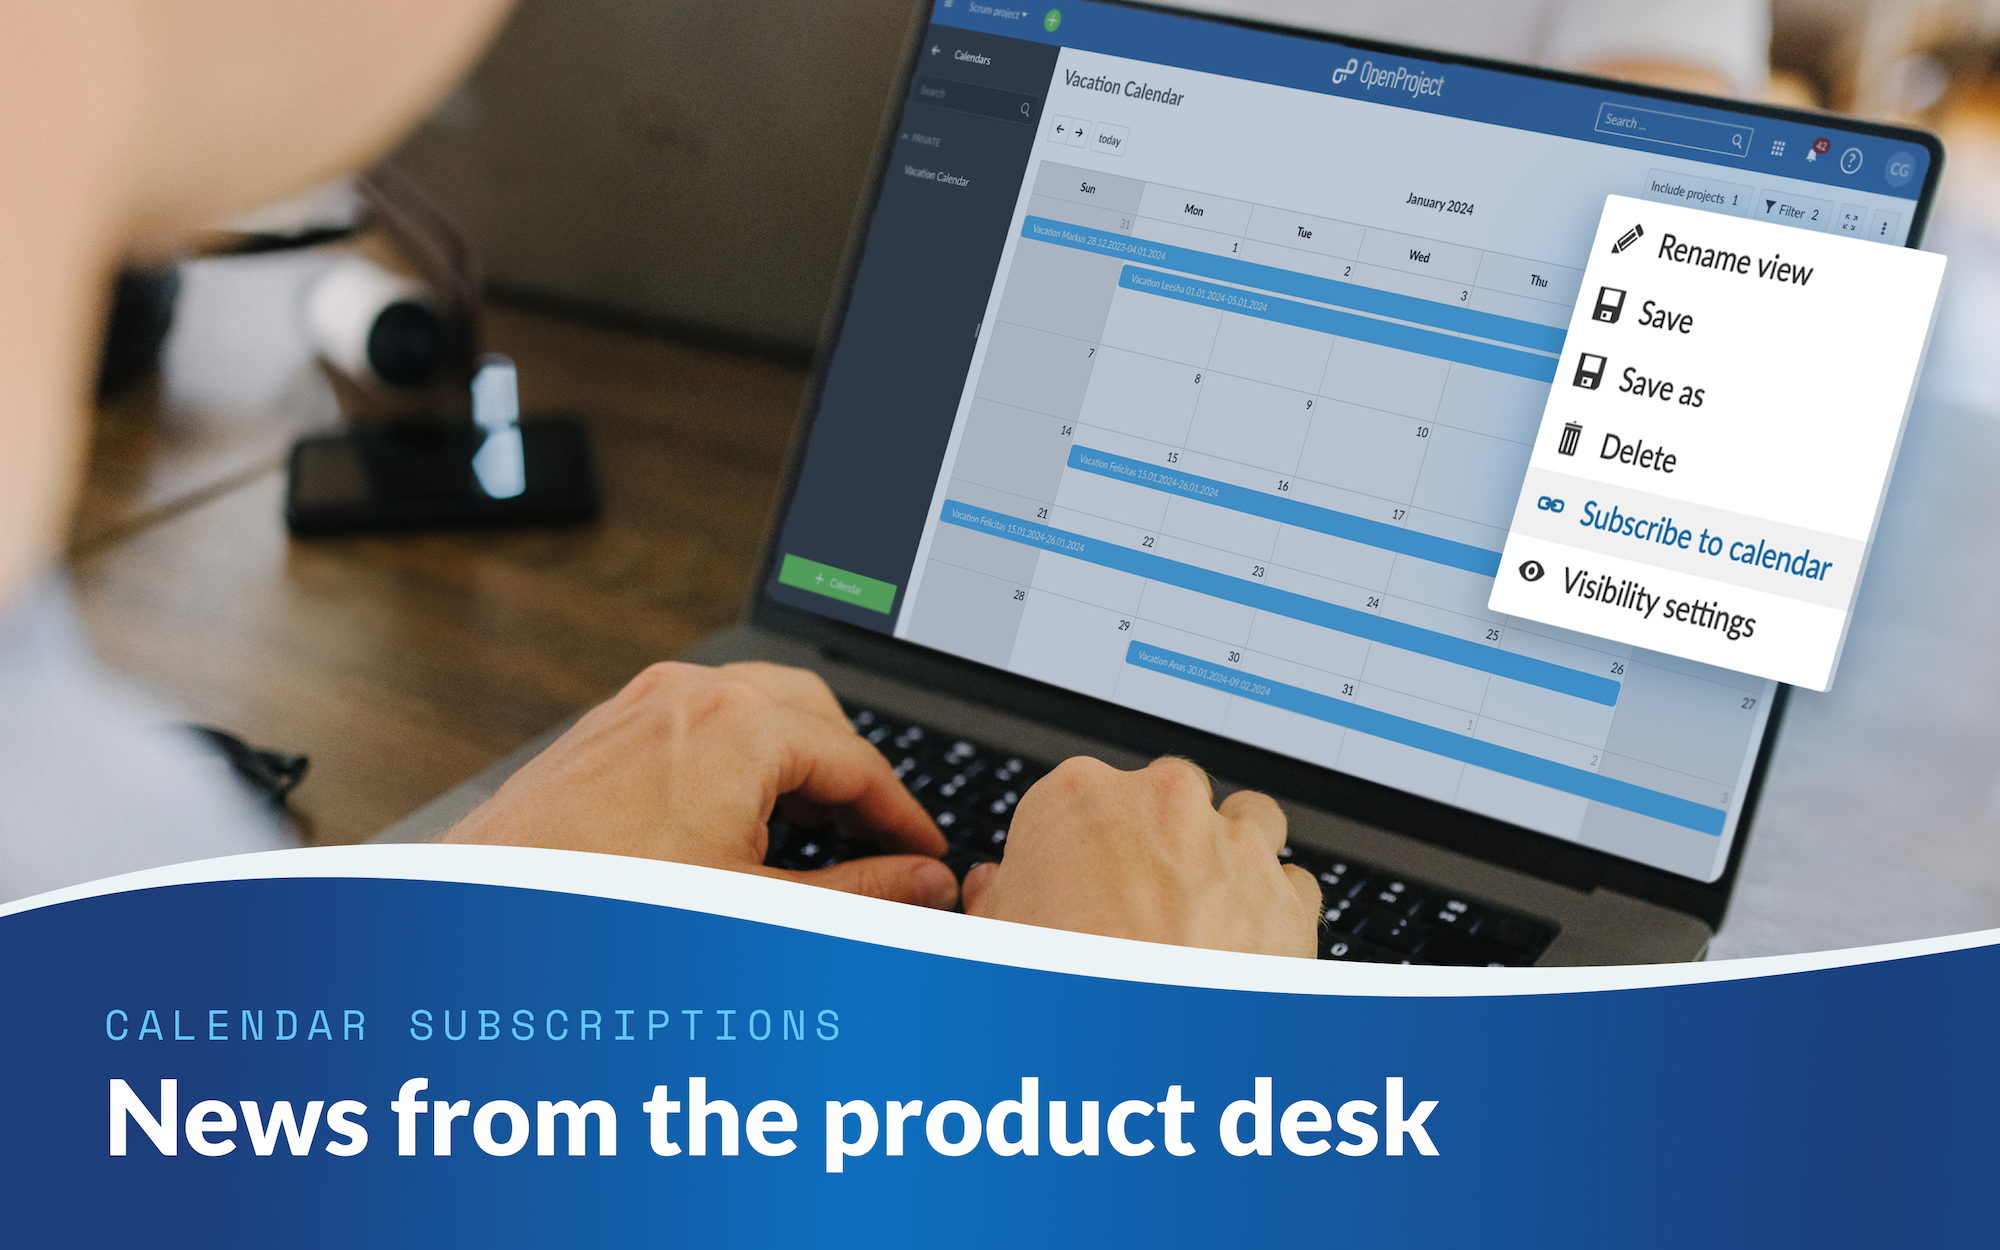 News from the product desk: Calendar subscriptions